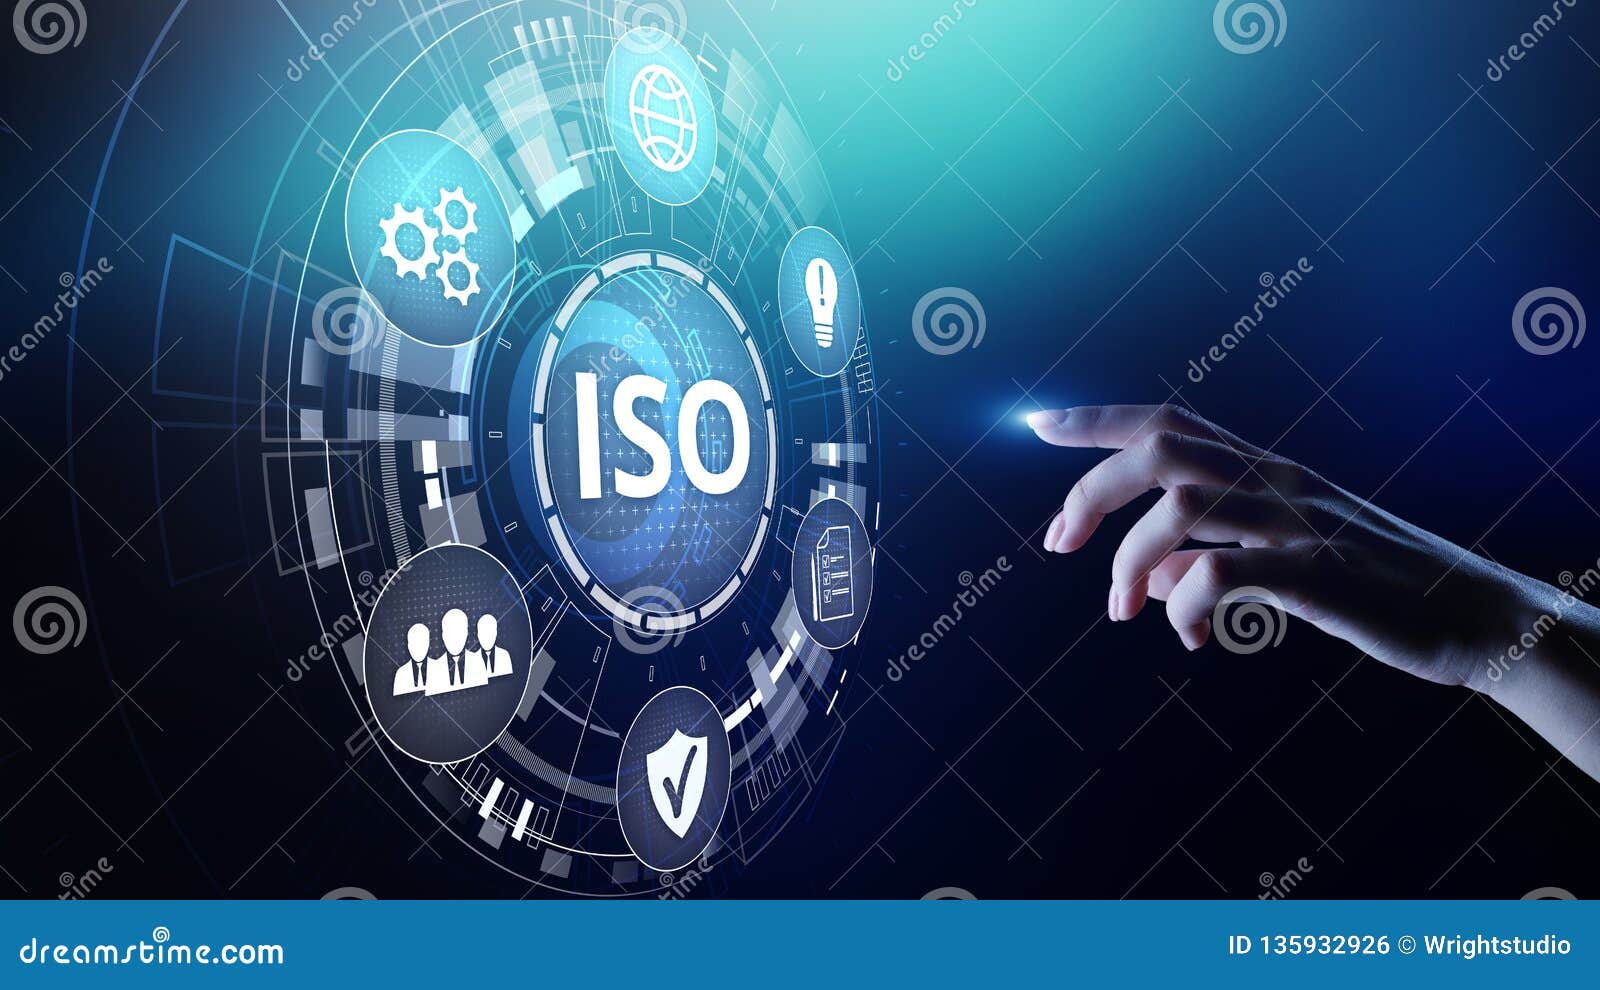 iso standards quality control assurance warranty business technology concept.